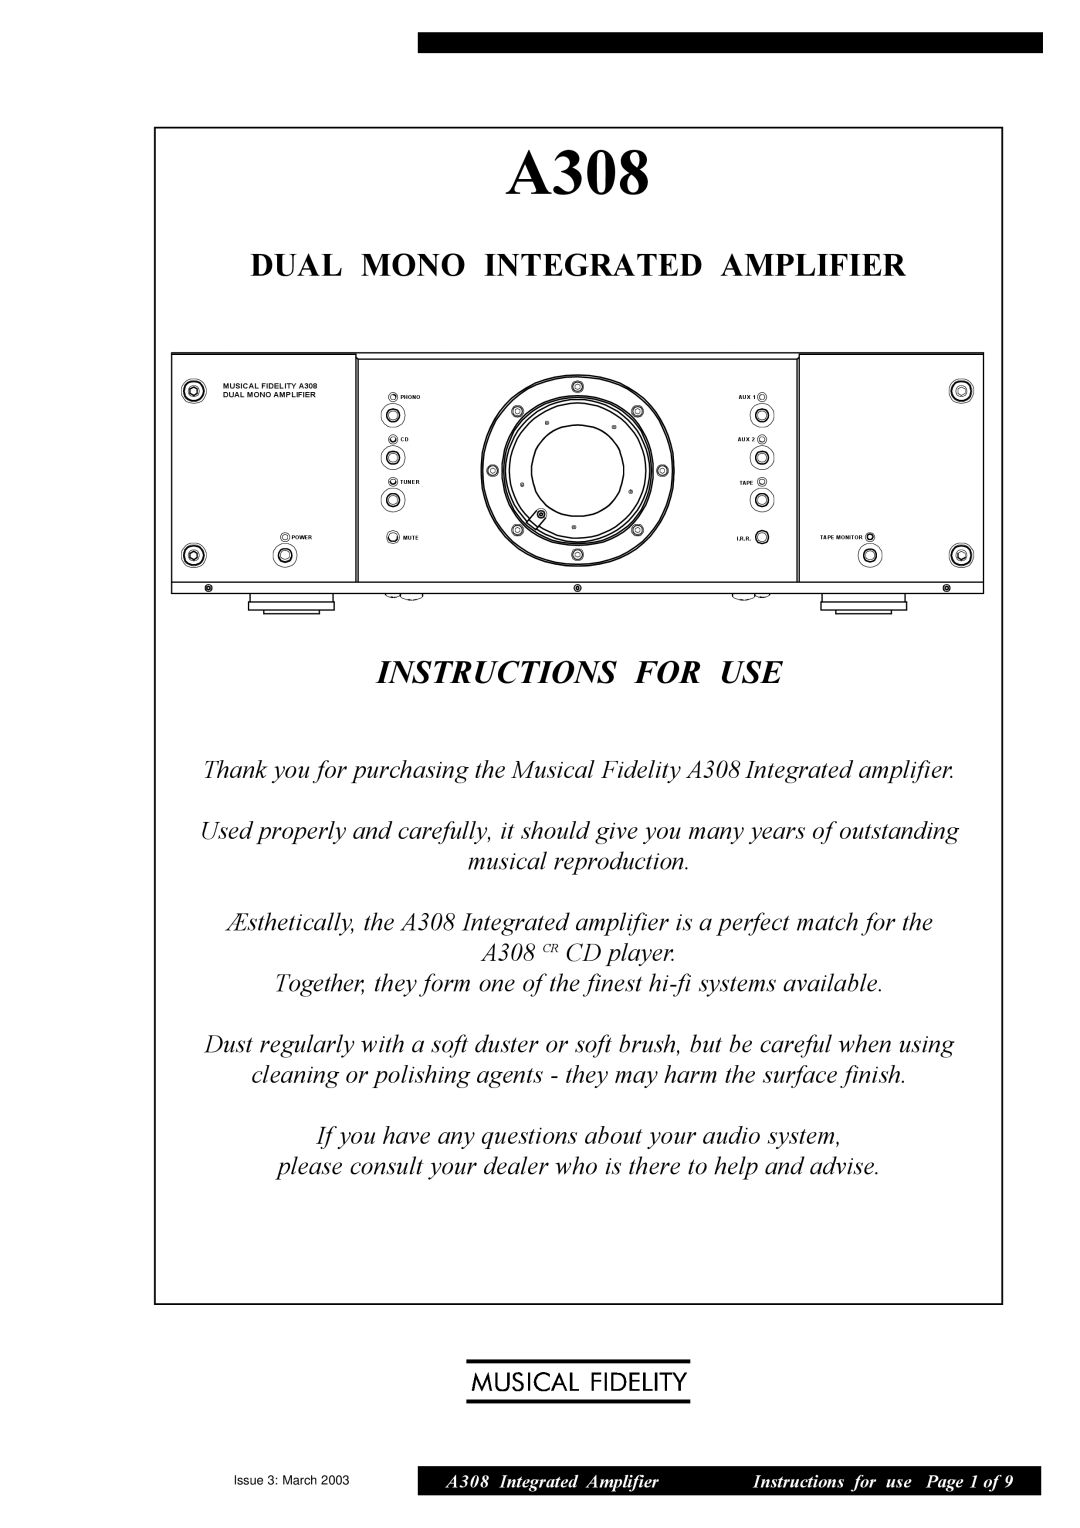 Musical Fidelity A308 manual Instructions For Use, Dual Mono Integrated Amplifier 